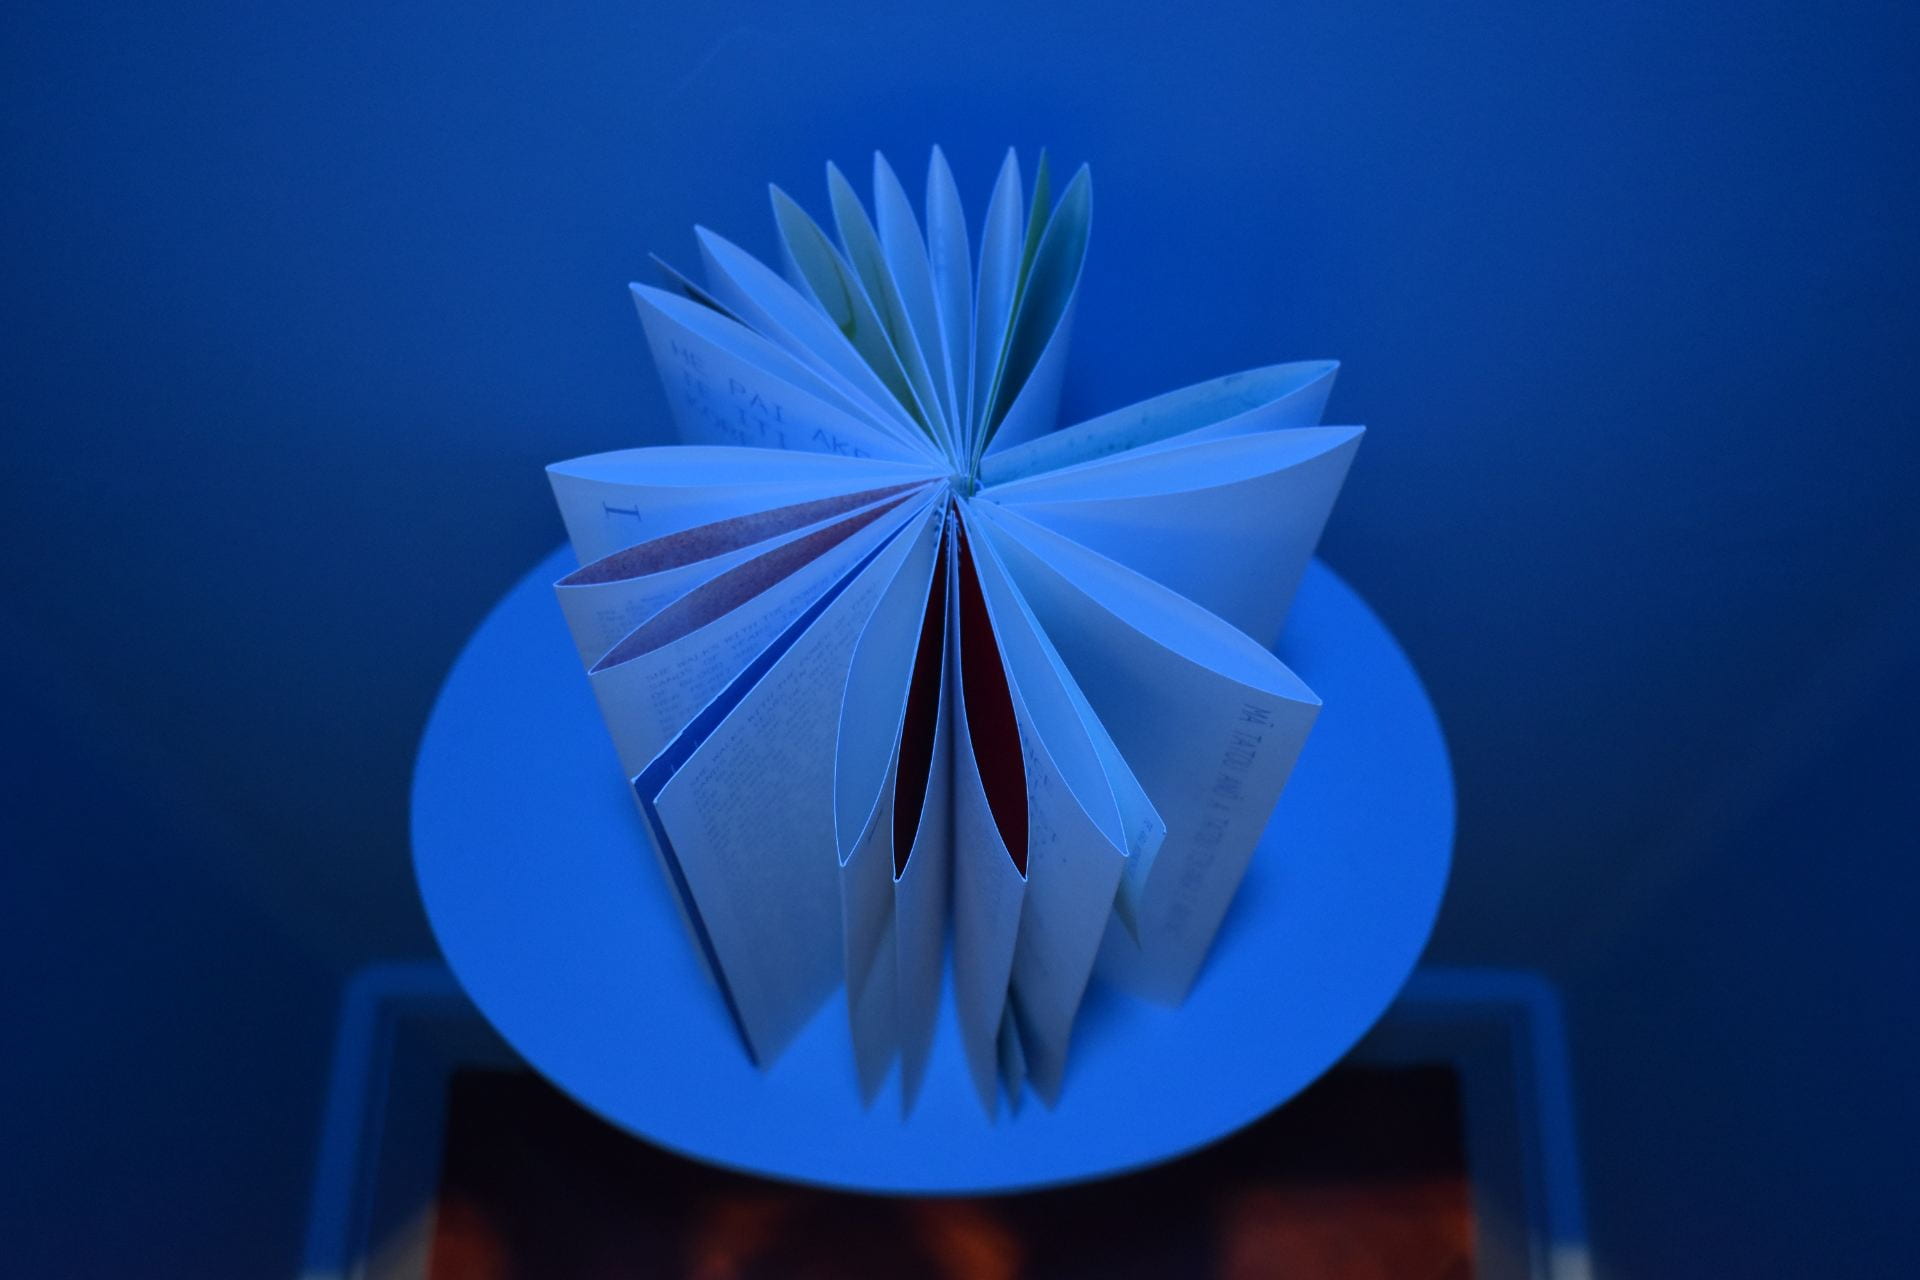 A book with spiral binding is arranged in a circular fashion on top of a round shelf. The book is bathed in blue light.